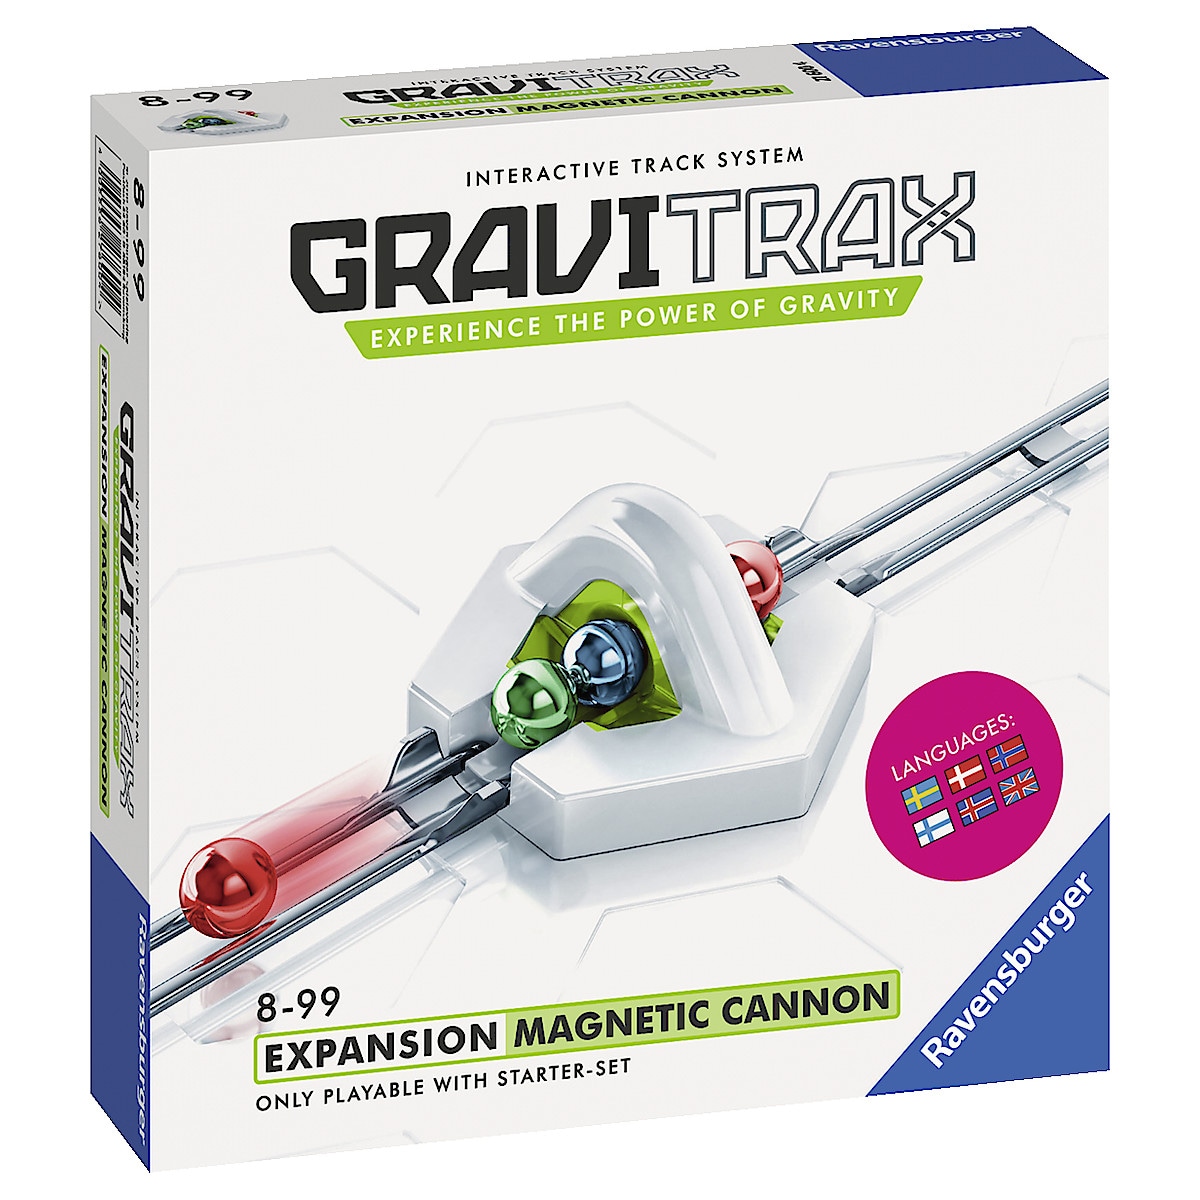 GraviTrax Expansion Magnetic Cannon, Ravensburger